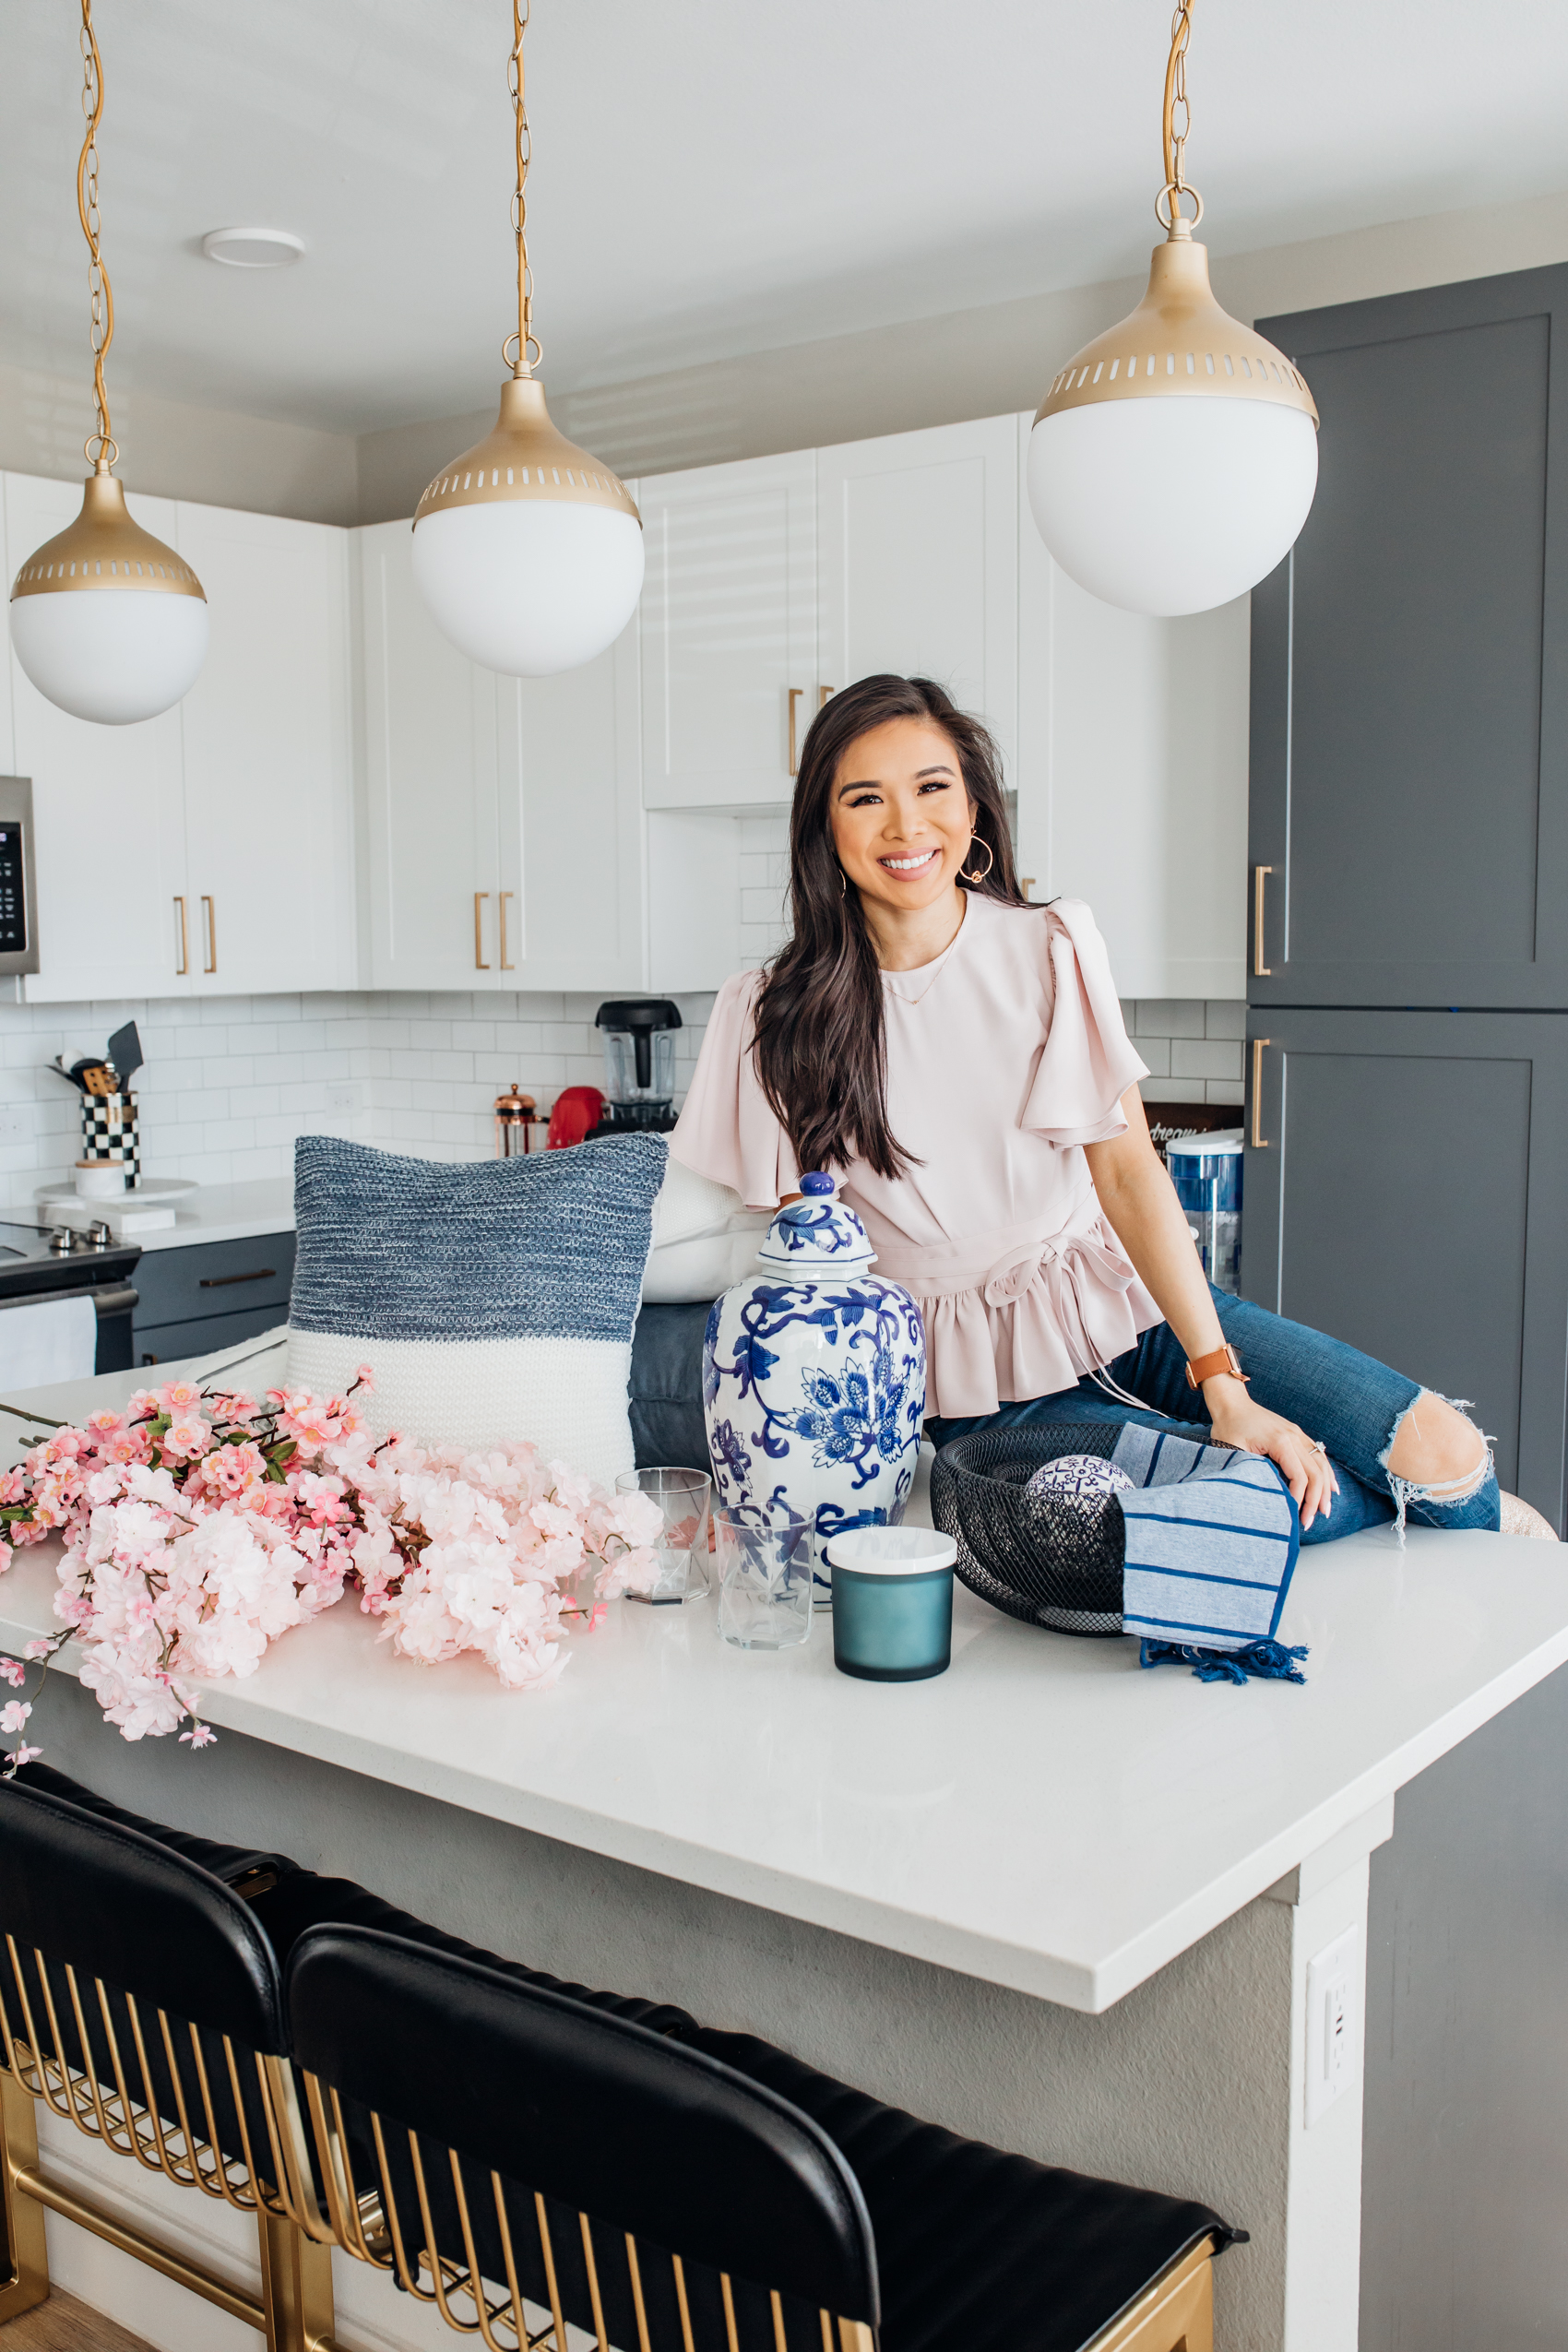 Blogger Hoang-Kim shares how she refreshes her kitchen with spring home decor using a ginger jar, cherry blossoms and candles